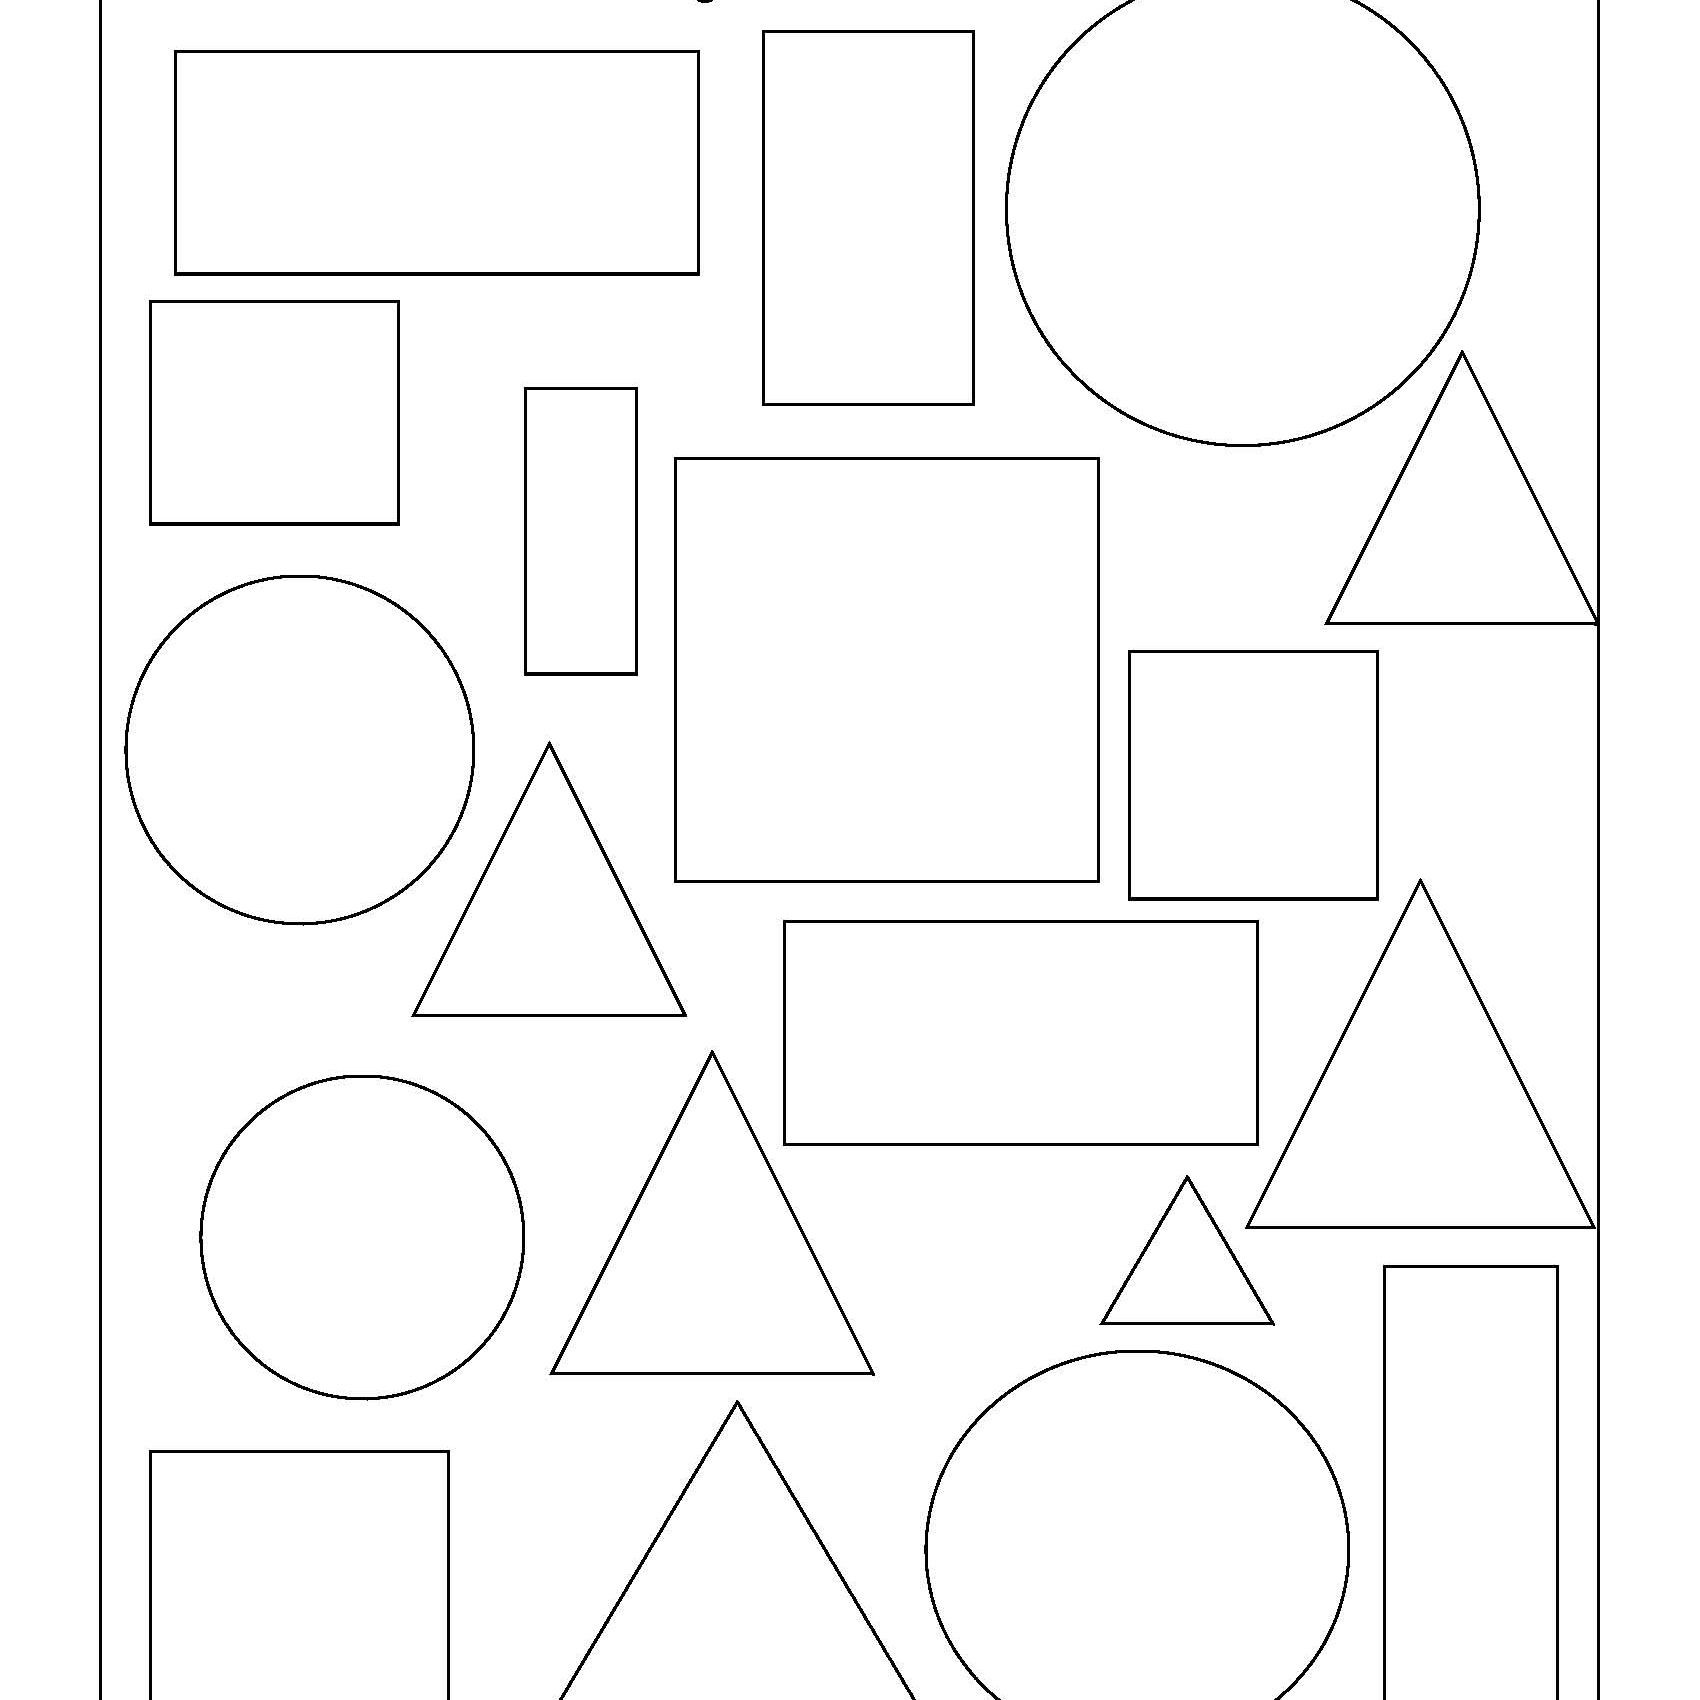 Free Math Worksheets First Grade 1 Addition Pictures Objects